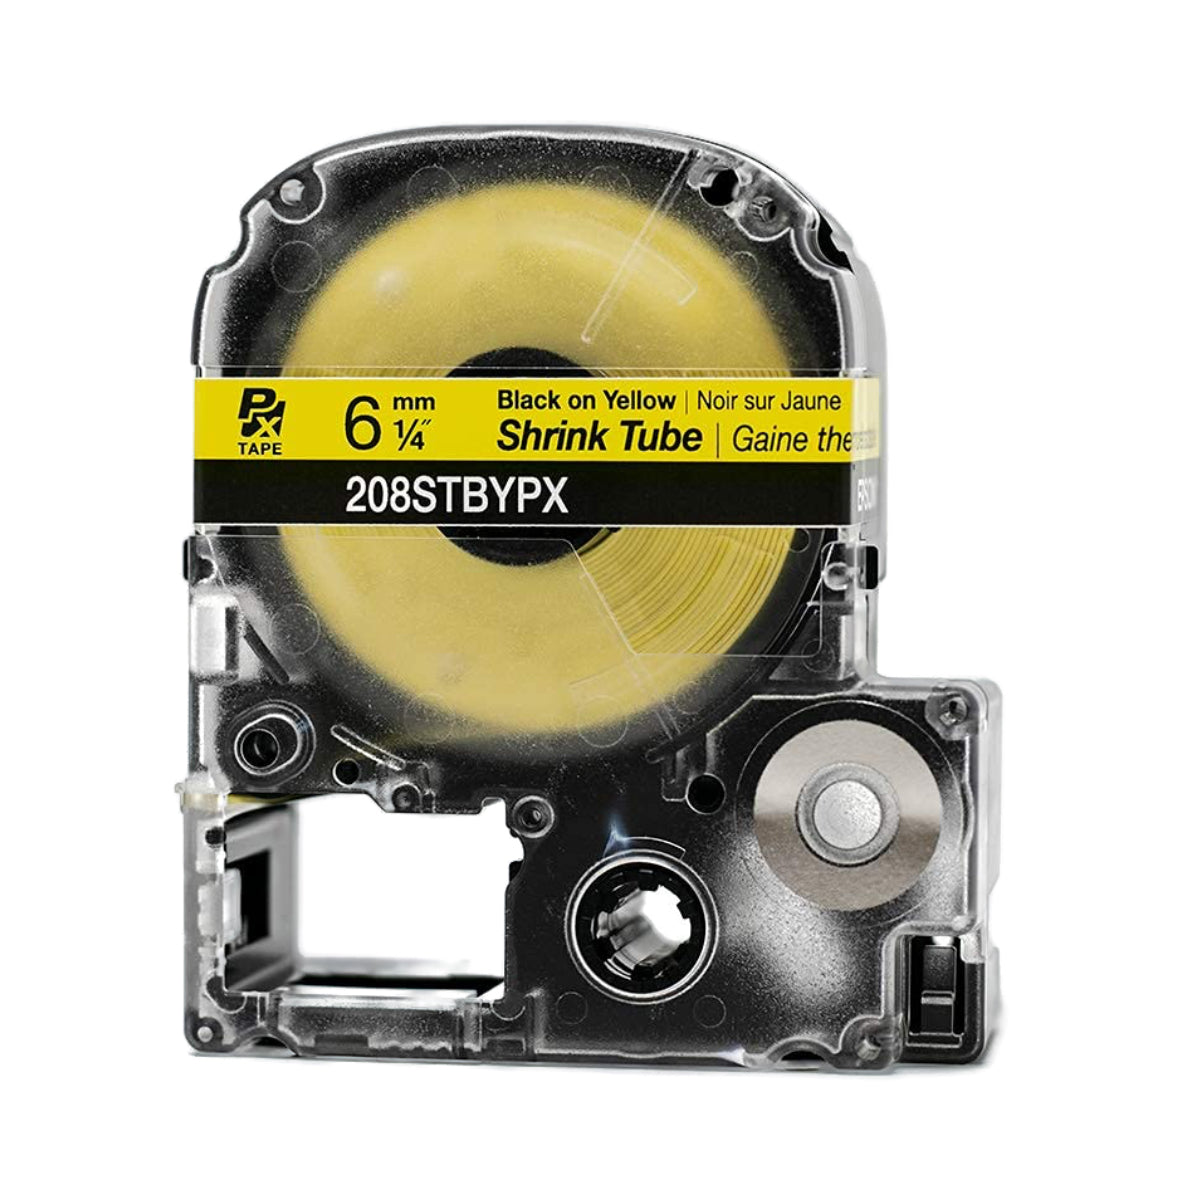 Epson LABELWORKS PX 6mm 208STBYPX Shrink Tube, Black on Yellow